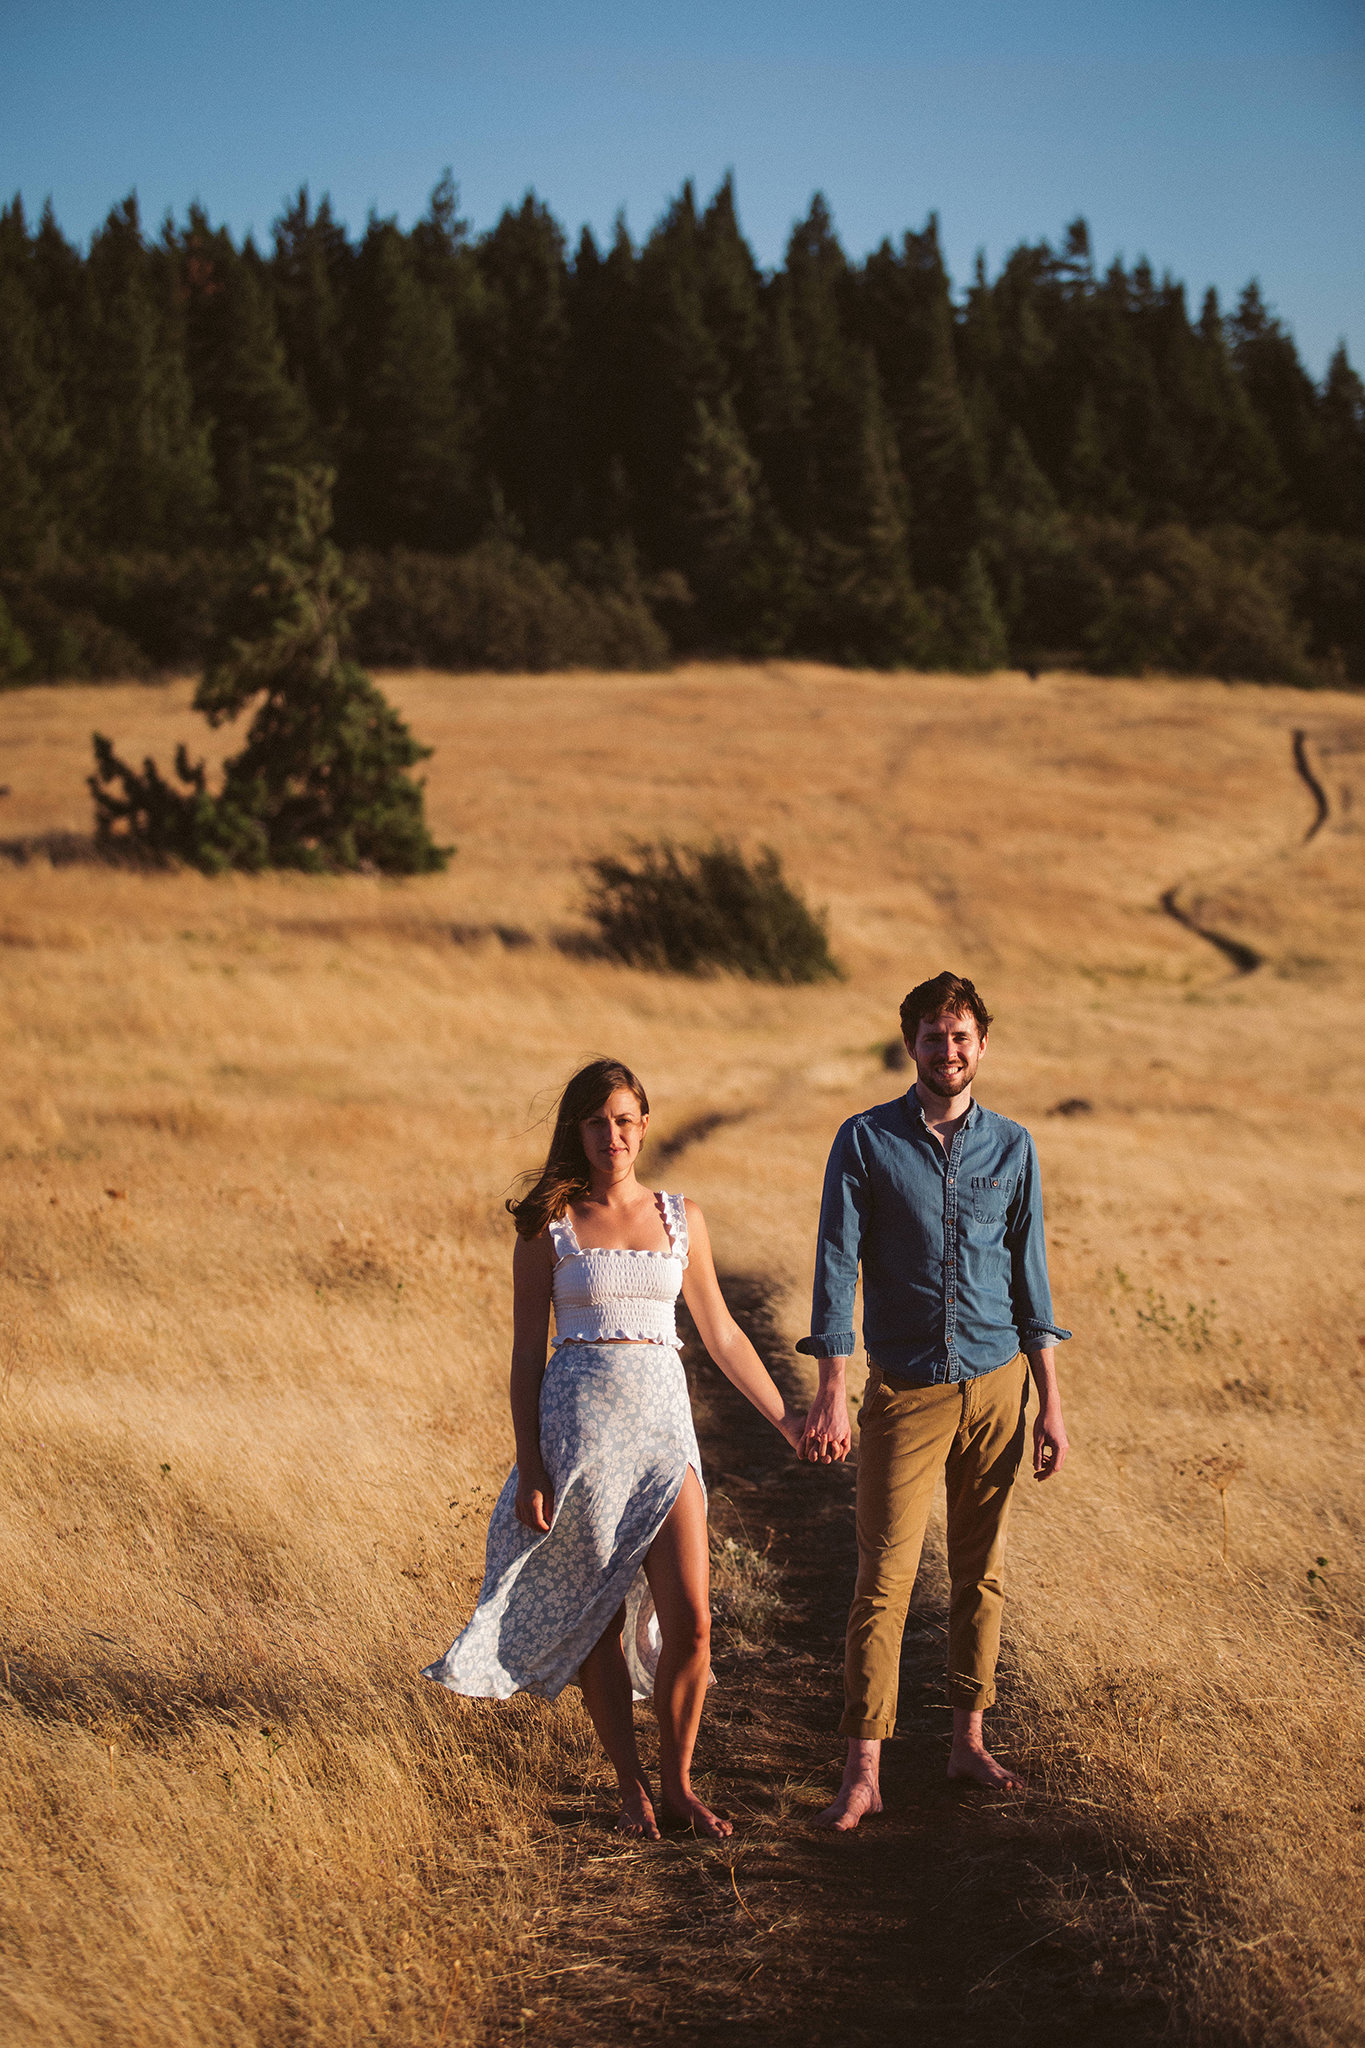 A vibrant golden hour engagement photo in Hood River